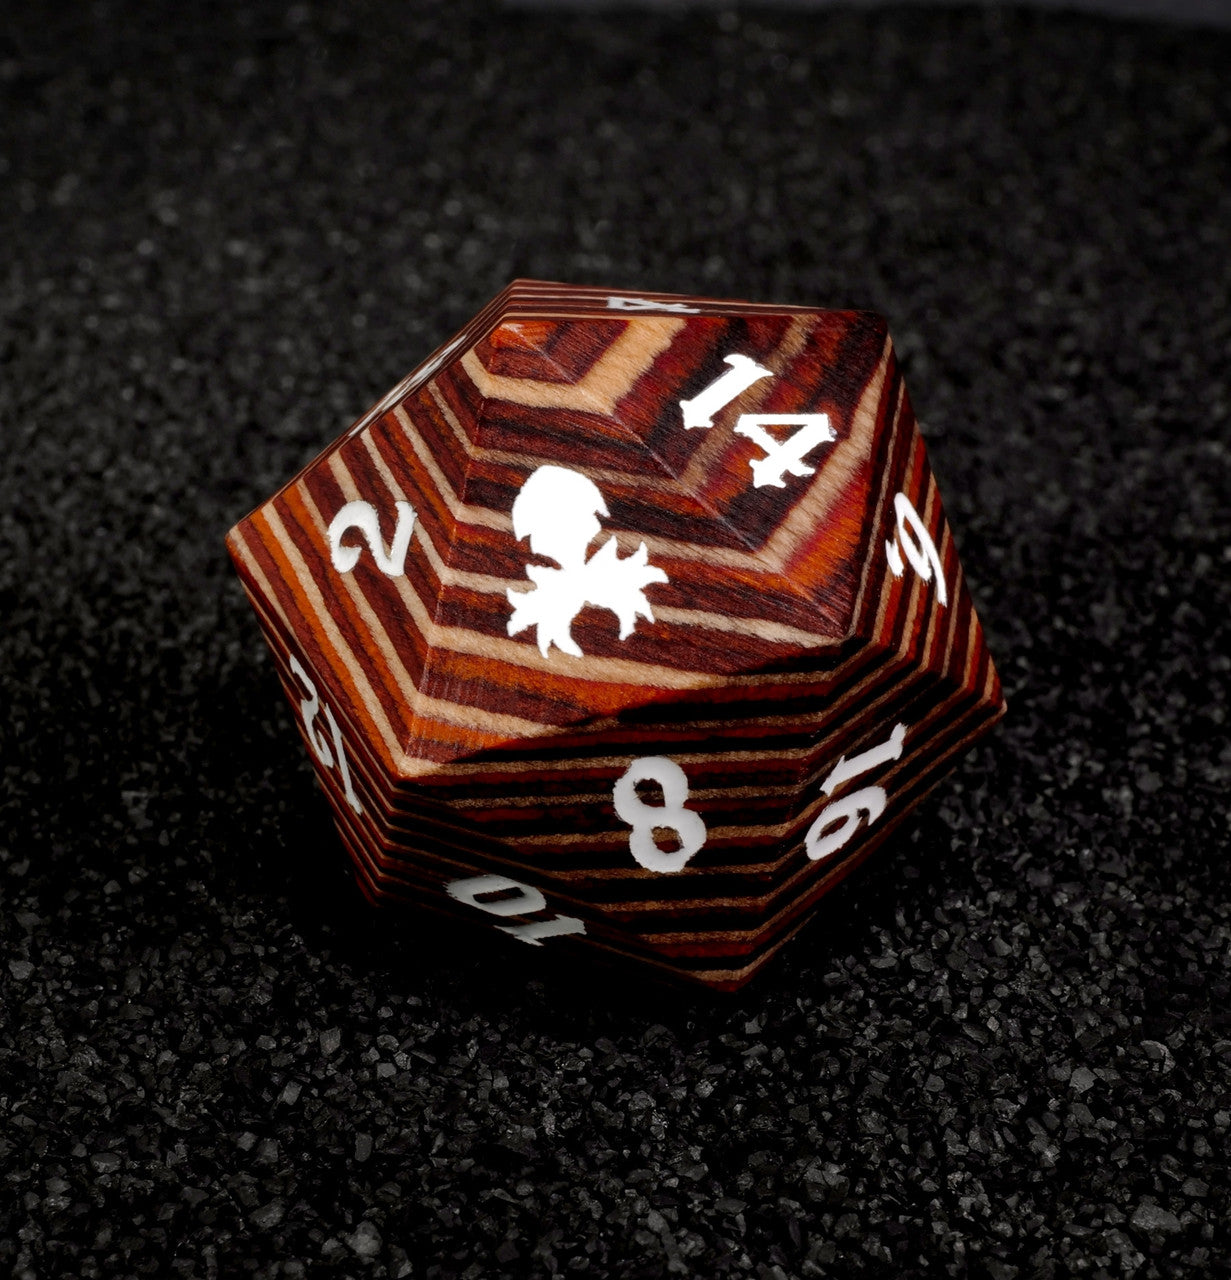 Light Colored 30mm Wooden D20